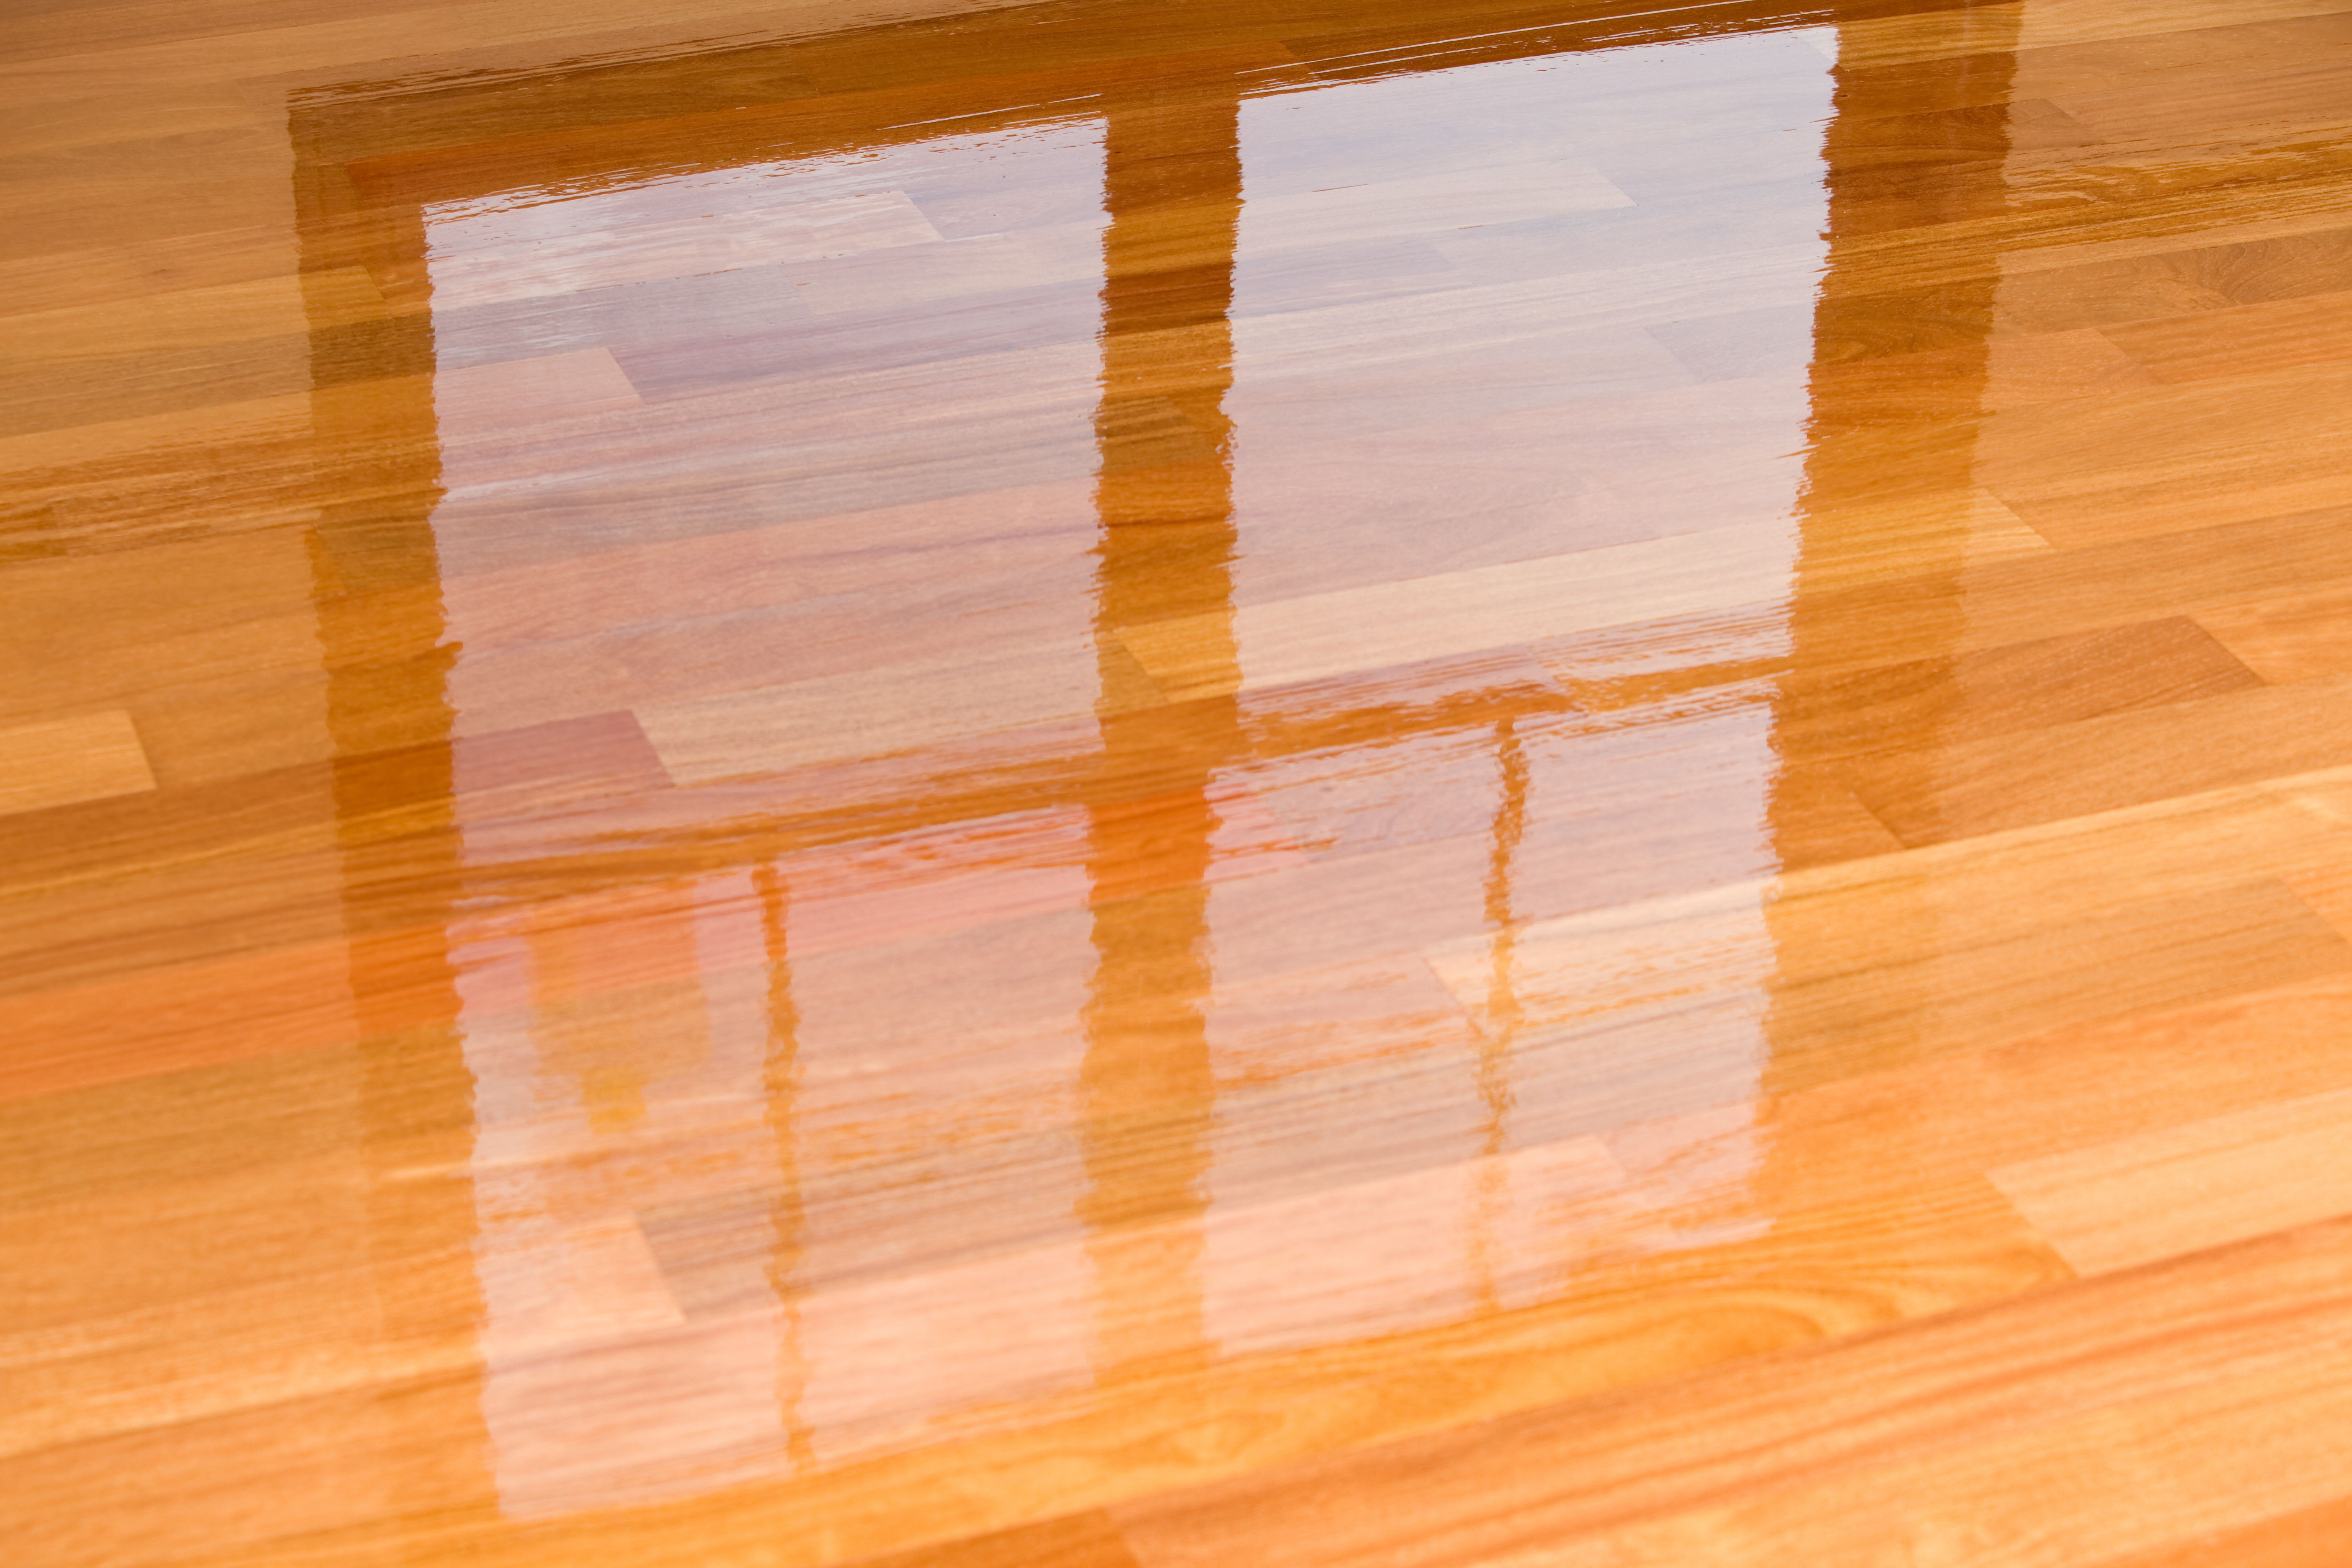 glue down hardwood floor problems of guide to laminate flooring water and damage repair pertaining to wet polyurethane on new hardwood floor with window reflection 183846705 582e34da3df78c6f6a403968